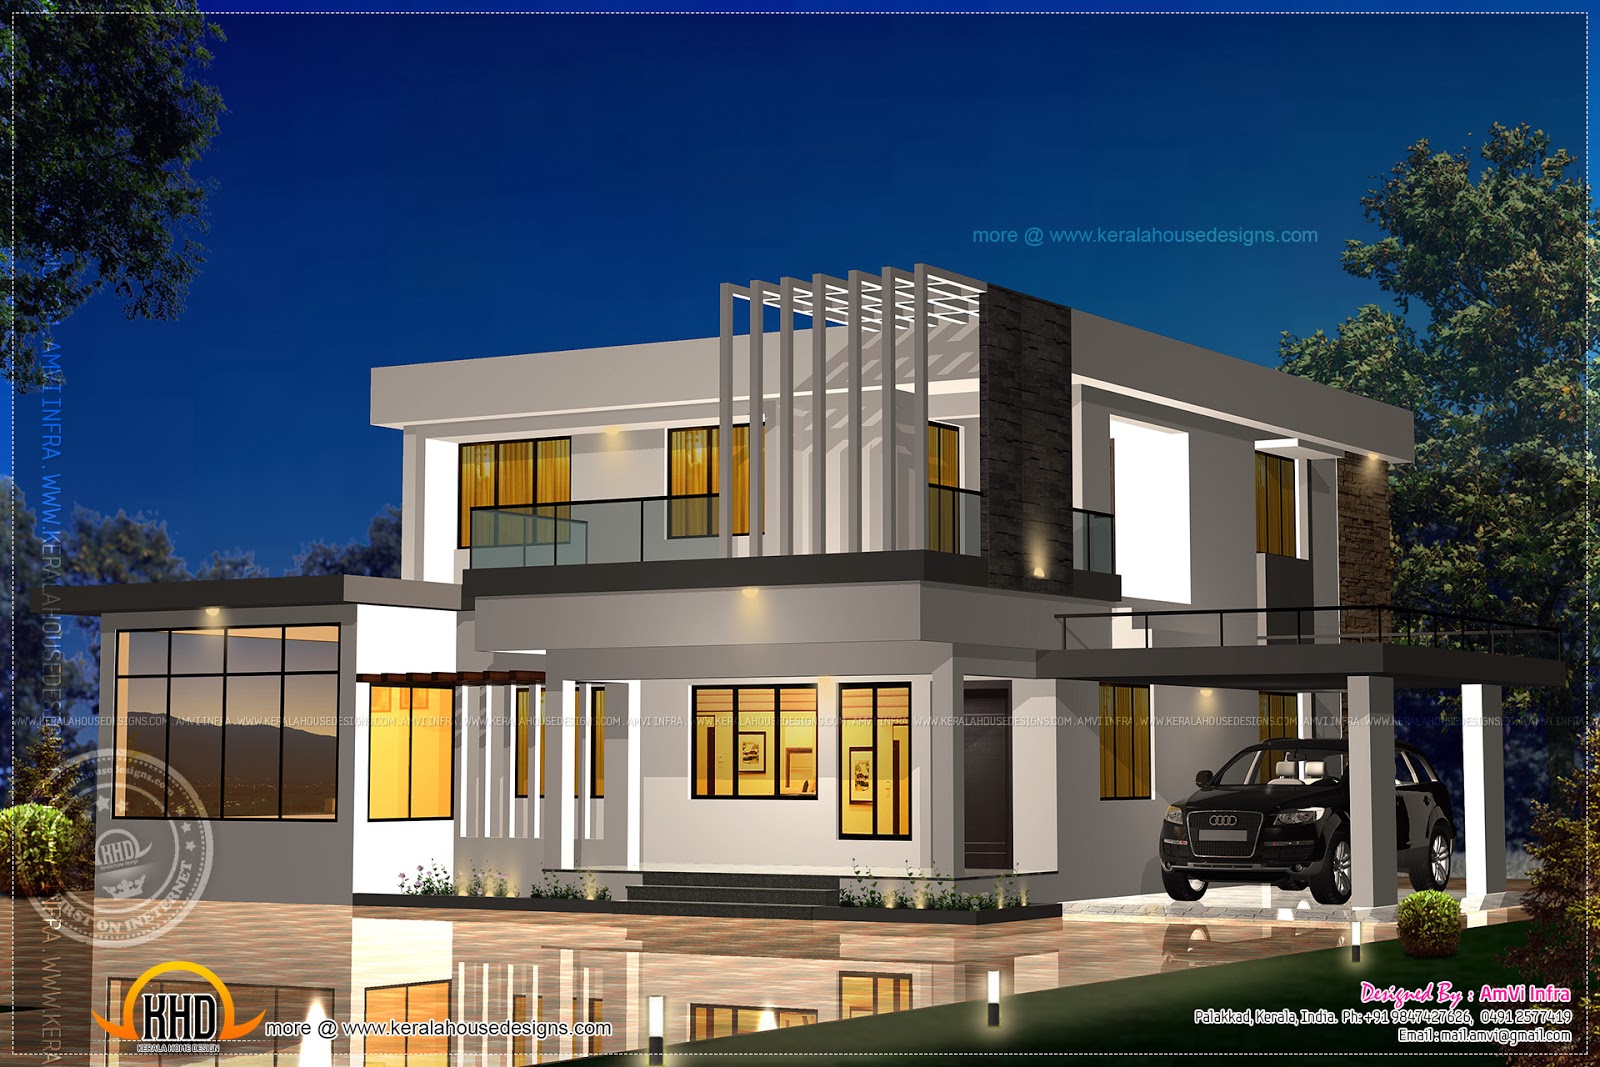  Elevation  and floor plan  of contemporary  home  Kerala 